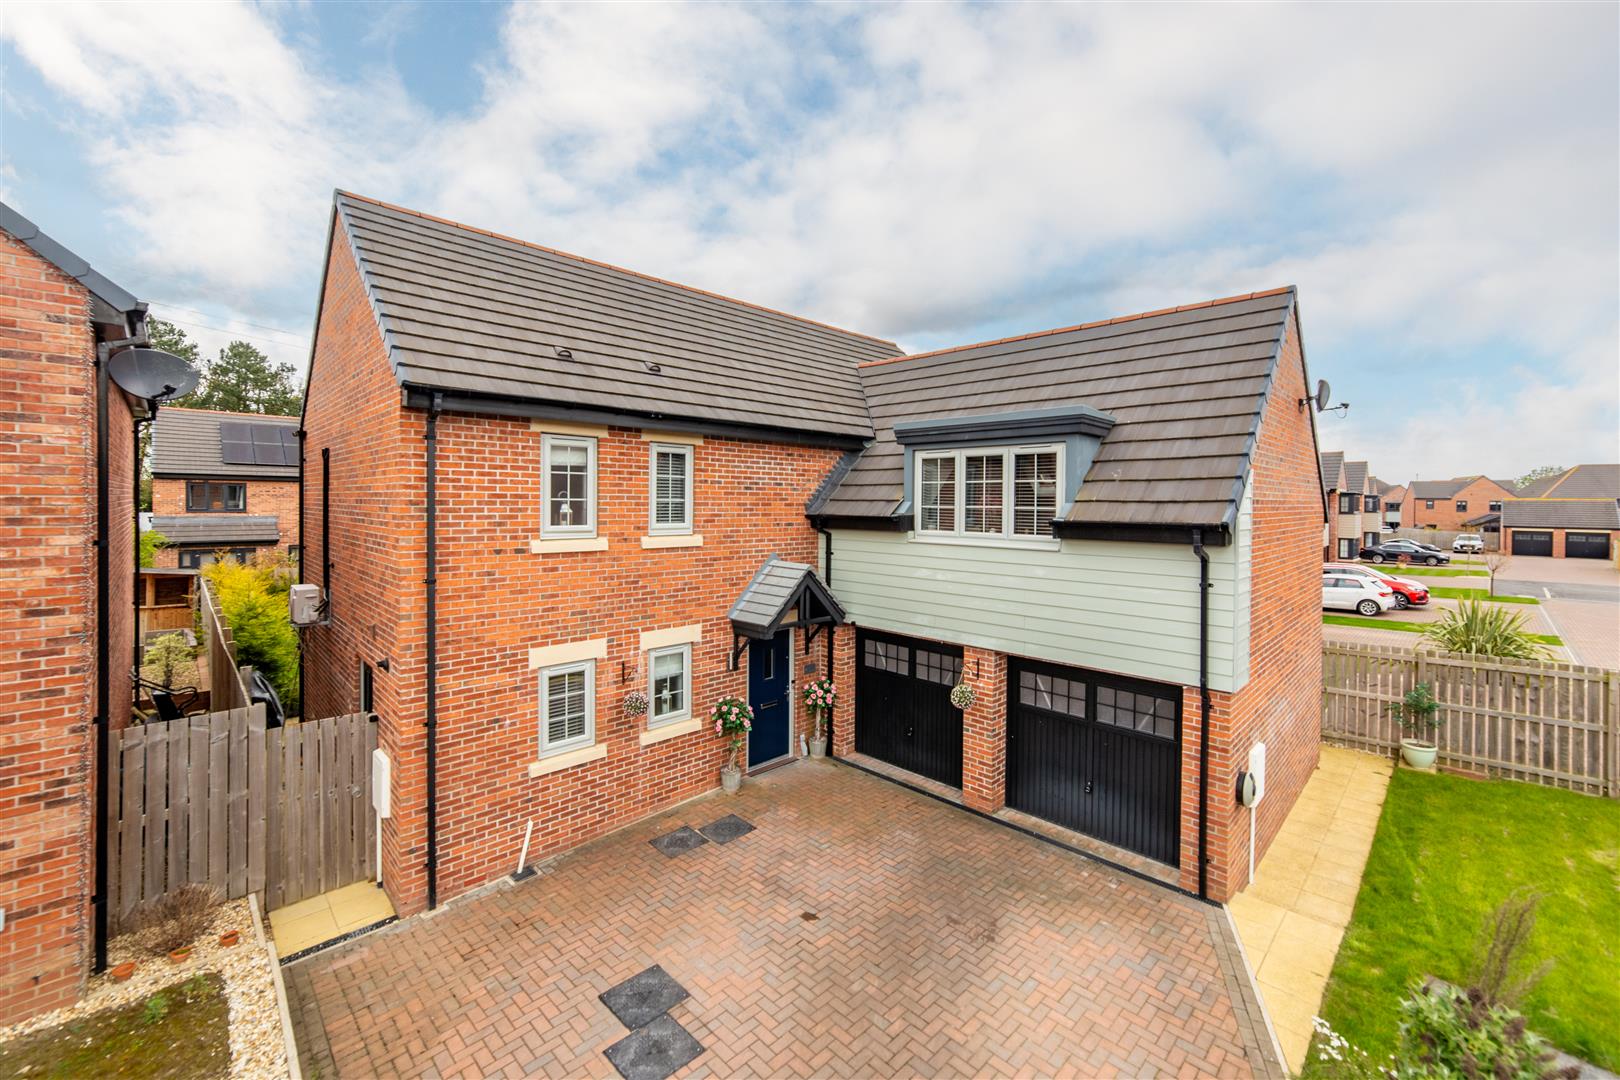 4 bed detached house for sale in Shepherds Cote Drive, Morpeth, NE61